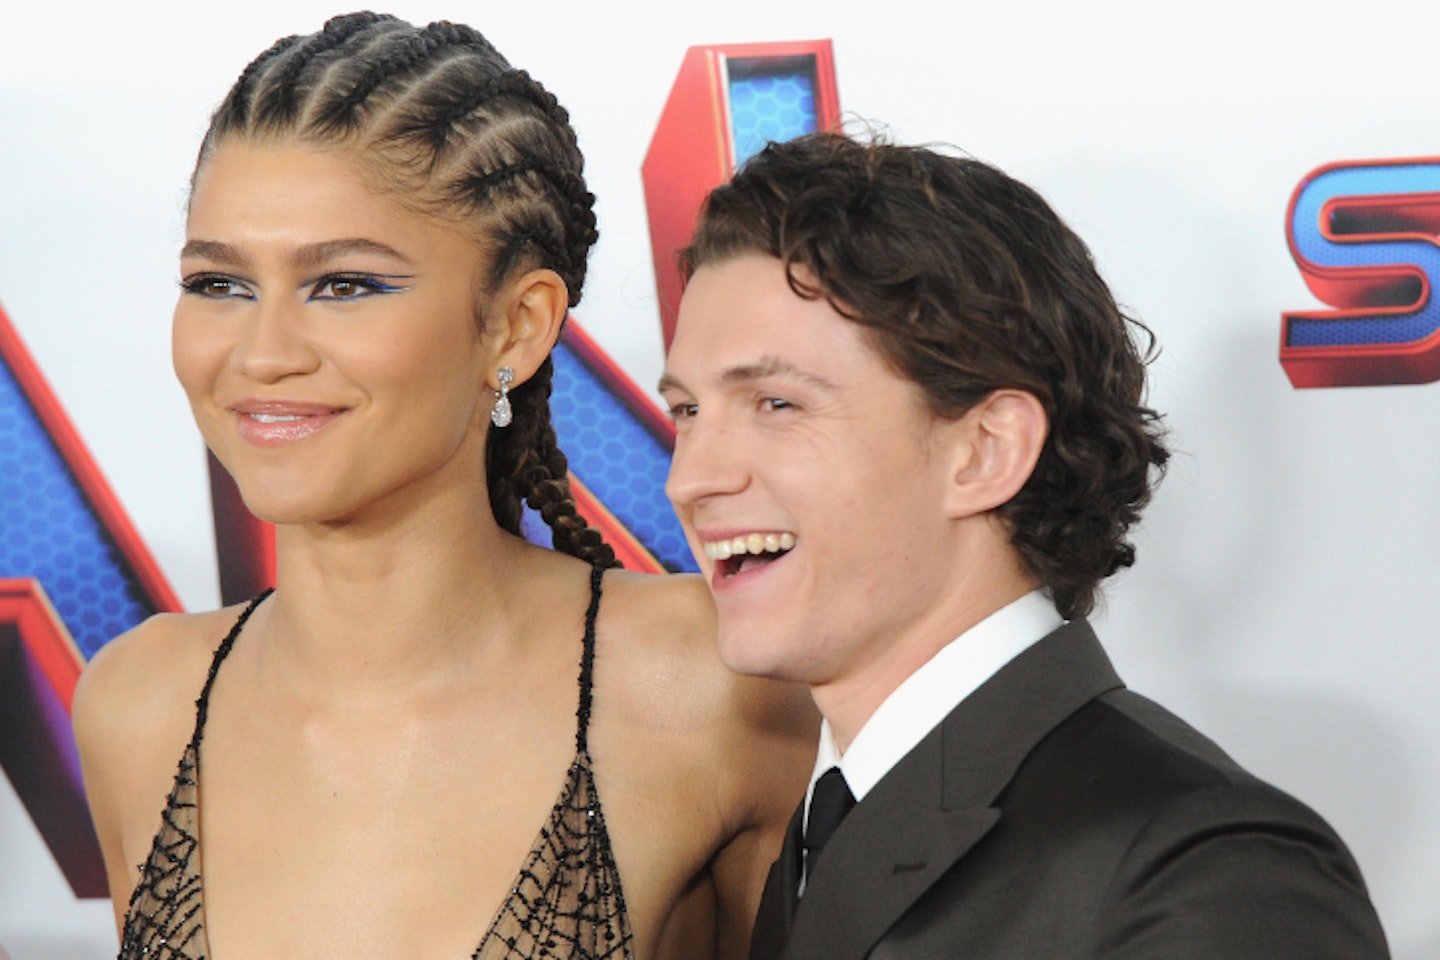 Zendaya spotted wearing a ring with Tom Holland's initials and